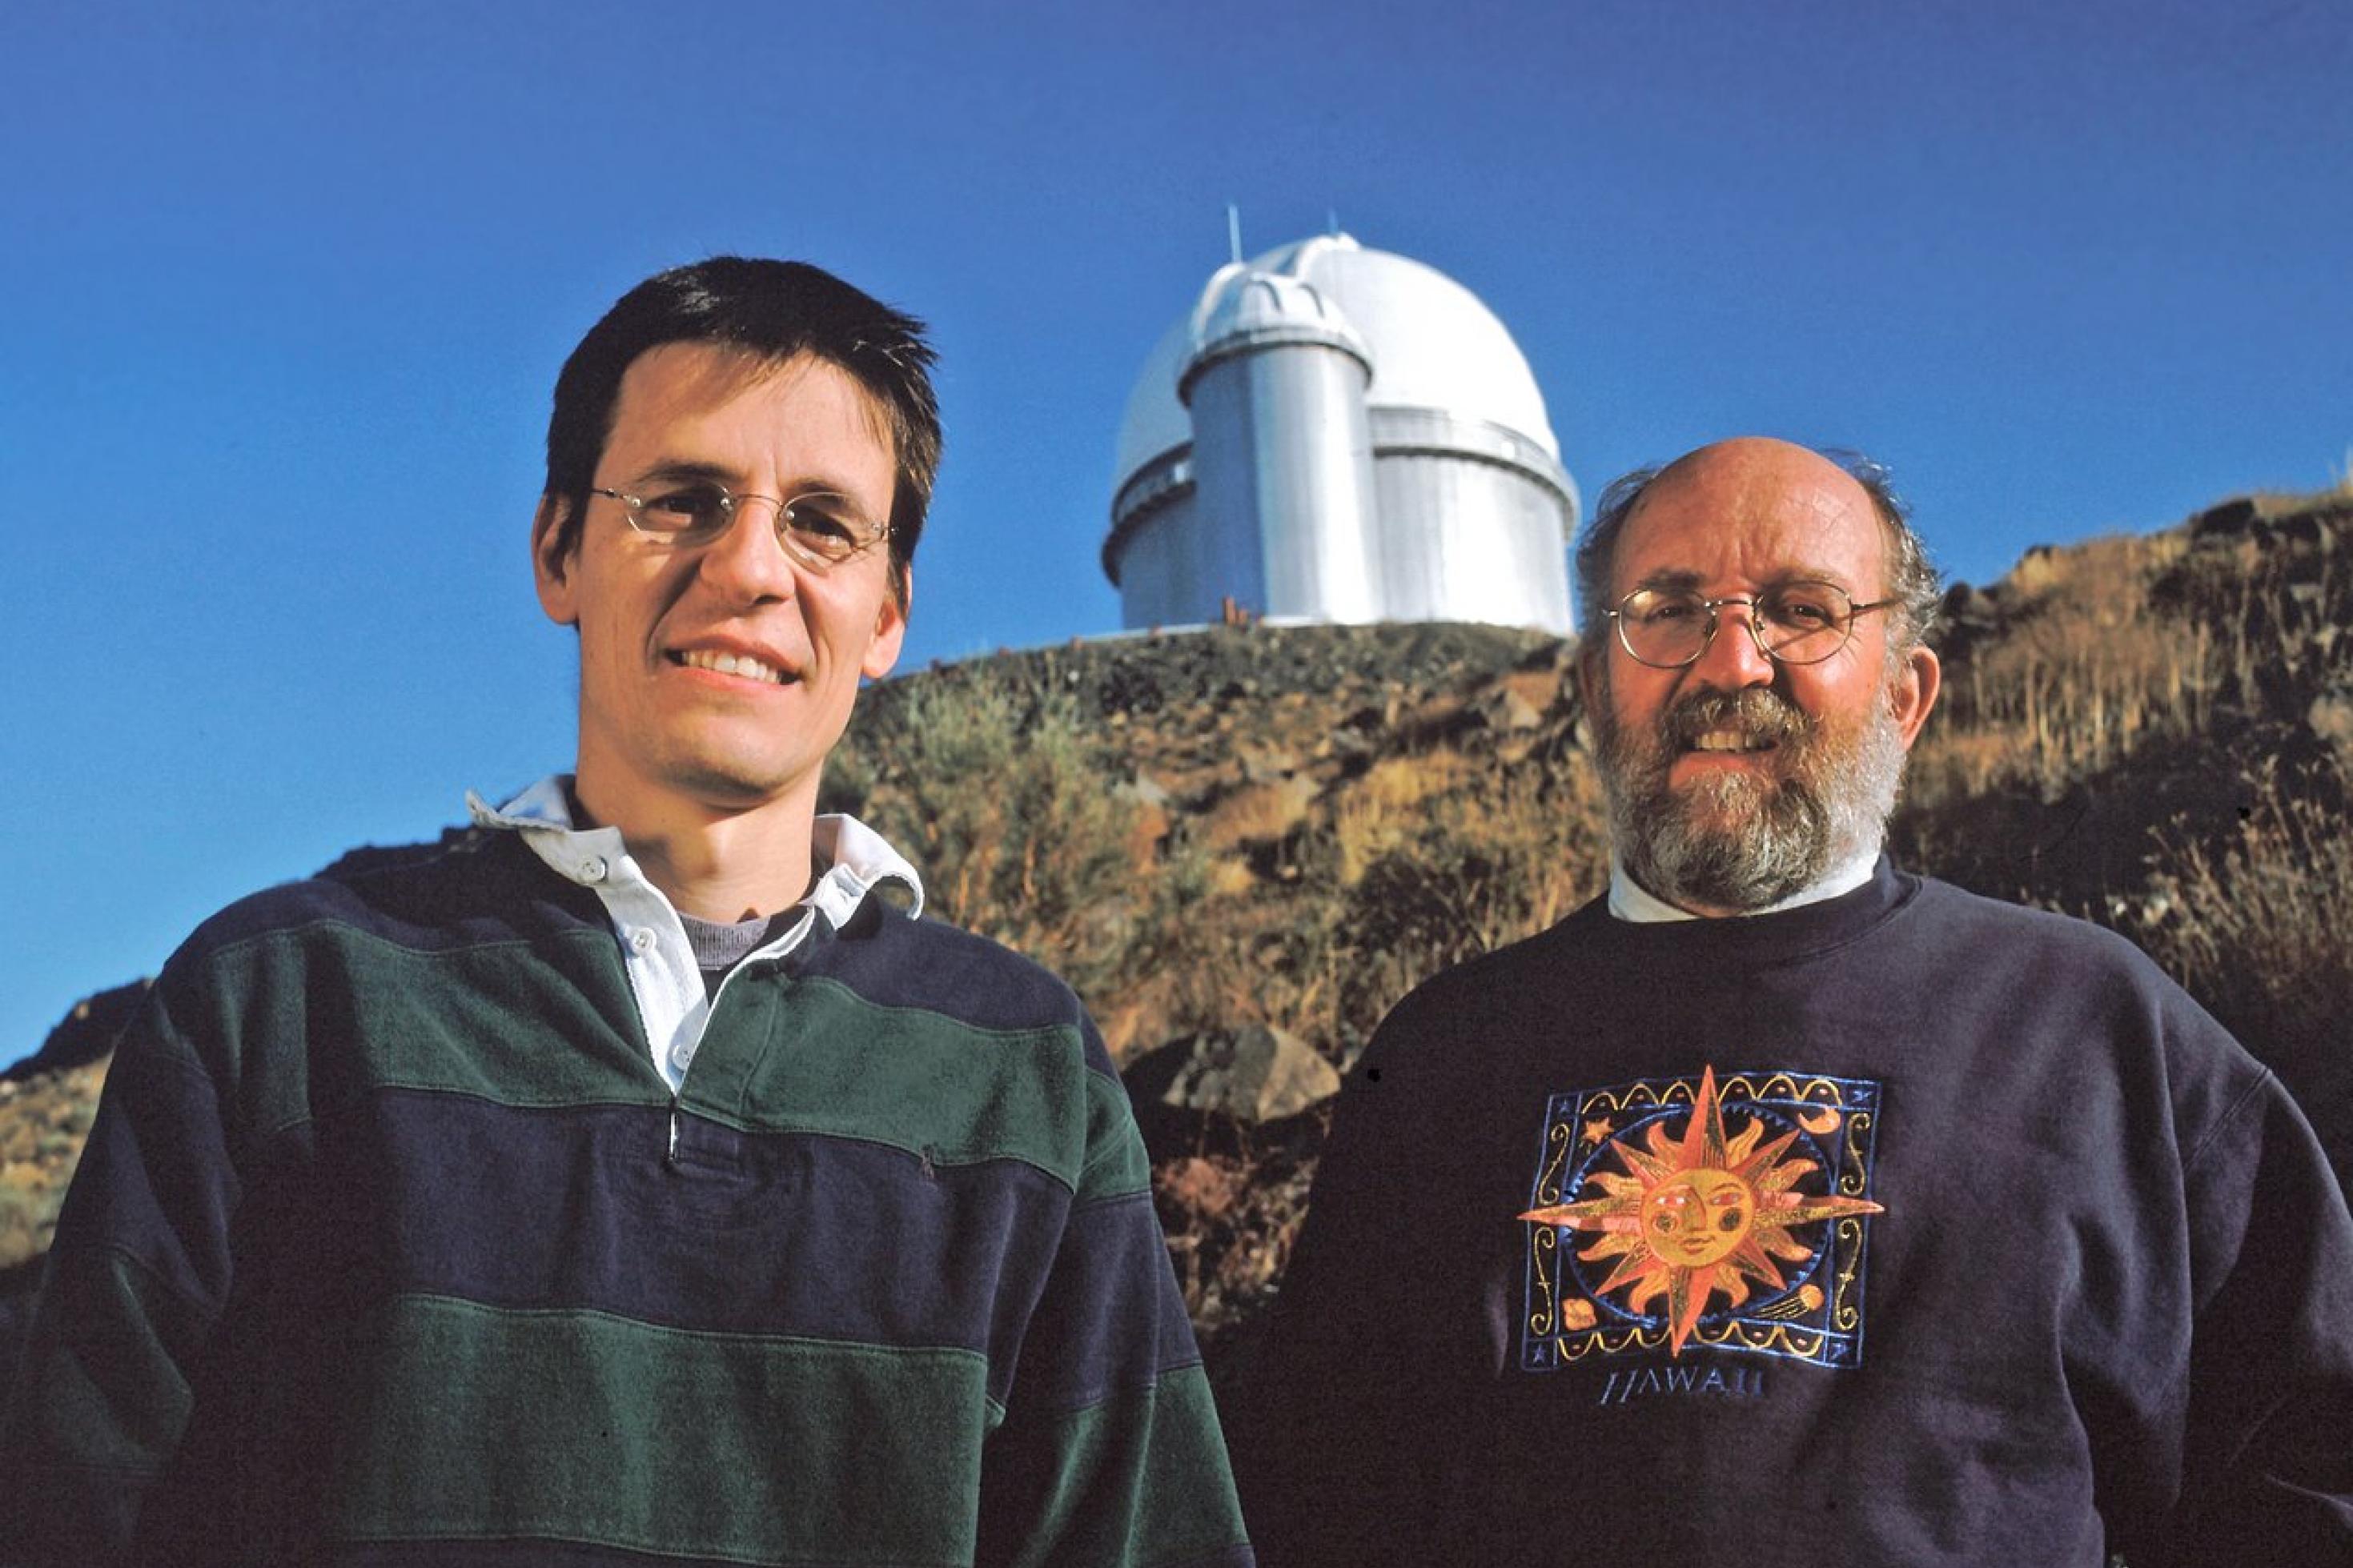 World-renowned Swiss astronomers Didier Queloz and Michel Mayor of the Geneva Observatory are seen here in front of ESO?s 3.6-metre telescope at La Silla Observatory in Chile. The telescope hosts HARPS, the world?s leading exoplanet hunter. They were awarded the 2011 BBVA Foundation Frontiers of Knowledge Award in Basic Sciences for their ground-breaking work on exoplanets.